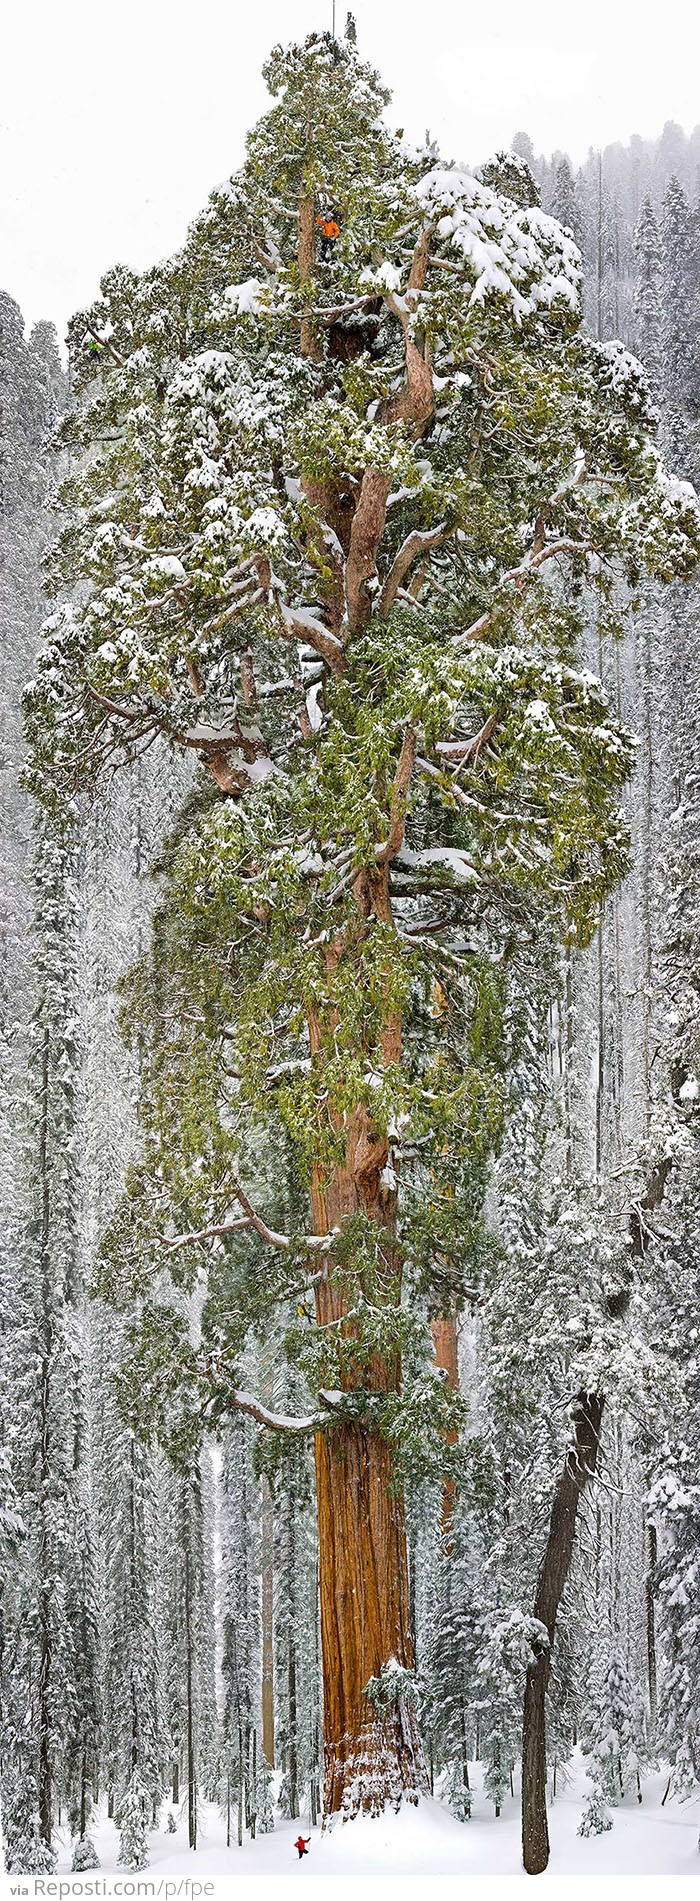 The President, Third-Largest Giant Sequoia Tree In The World, California